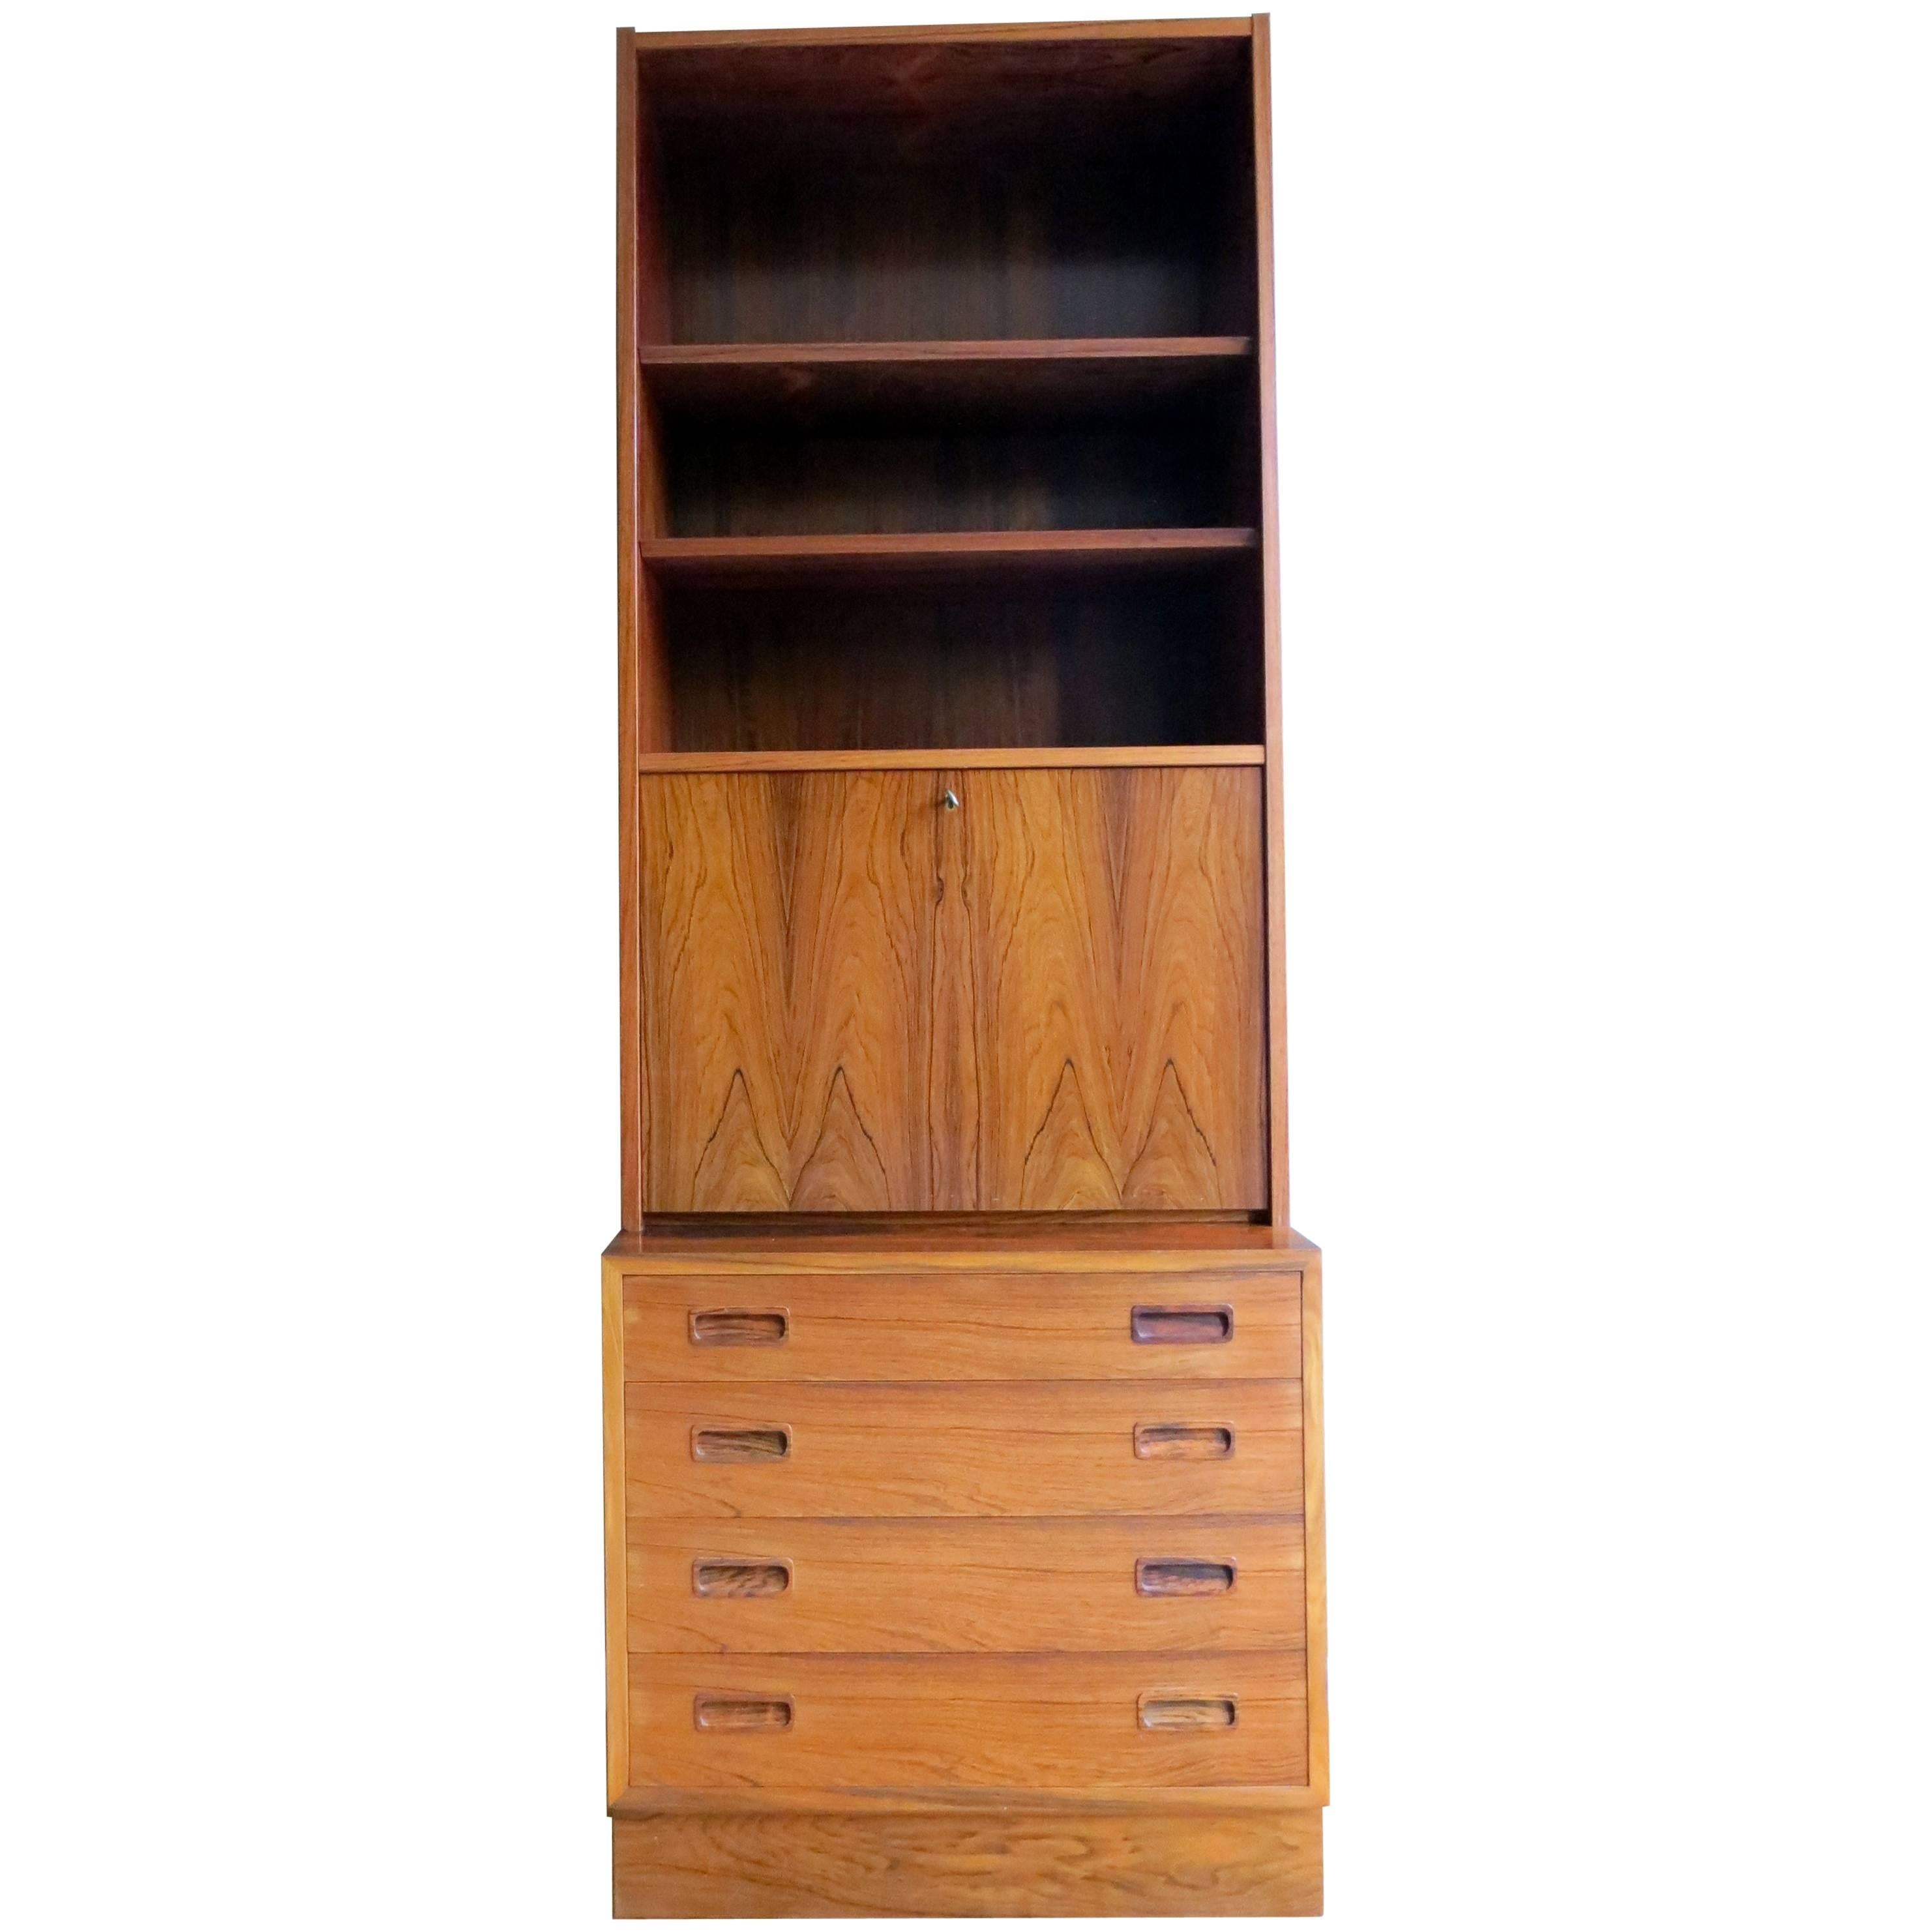 Poul Hundevad Rio Rosewood Wall Unit and Cabinet Danish Midcentury , 1960s For Sale